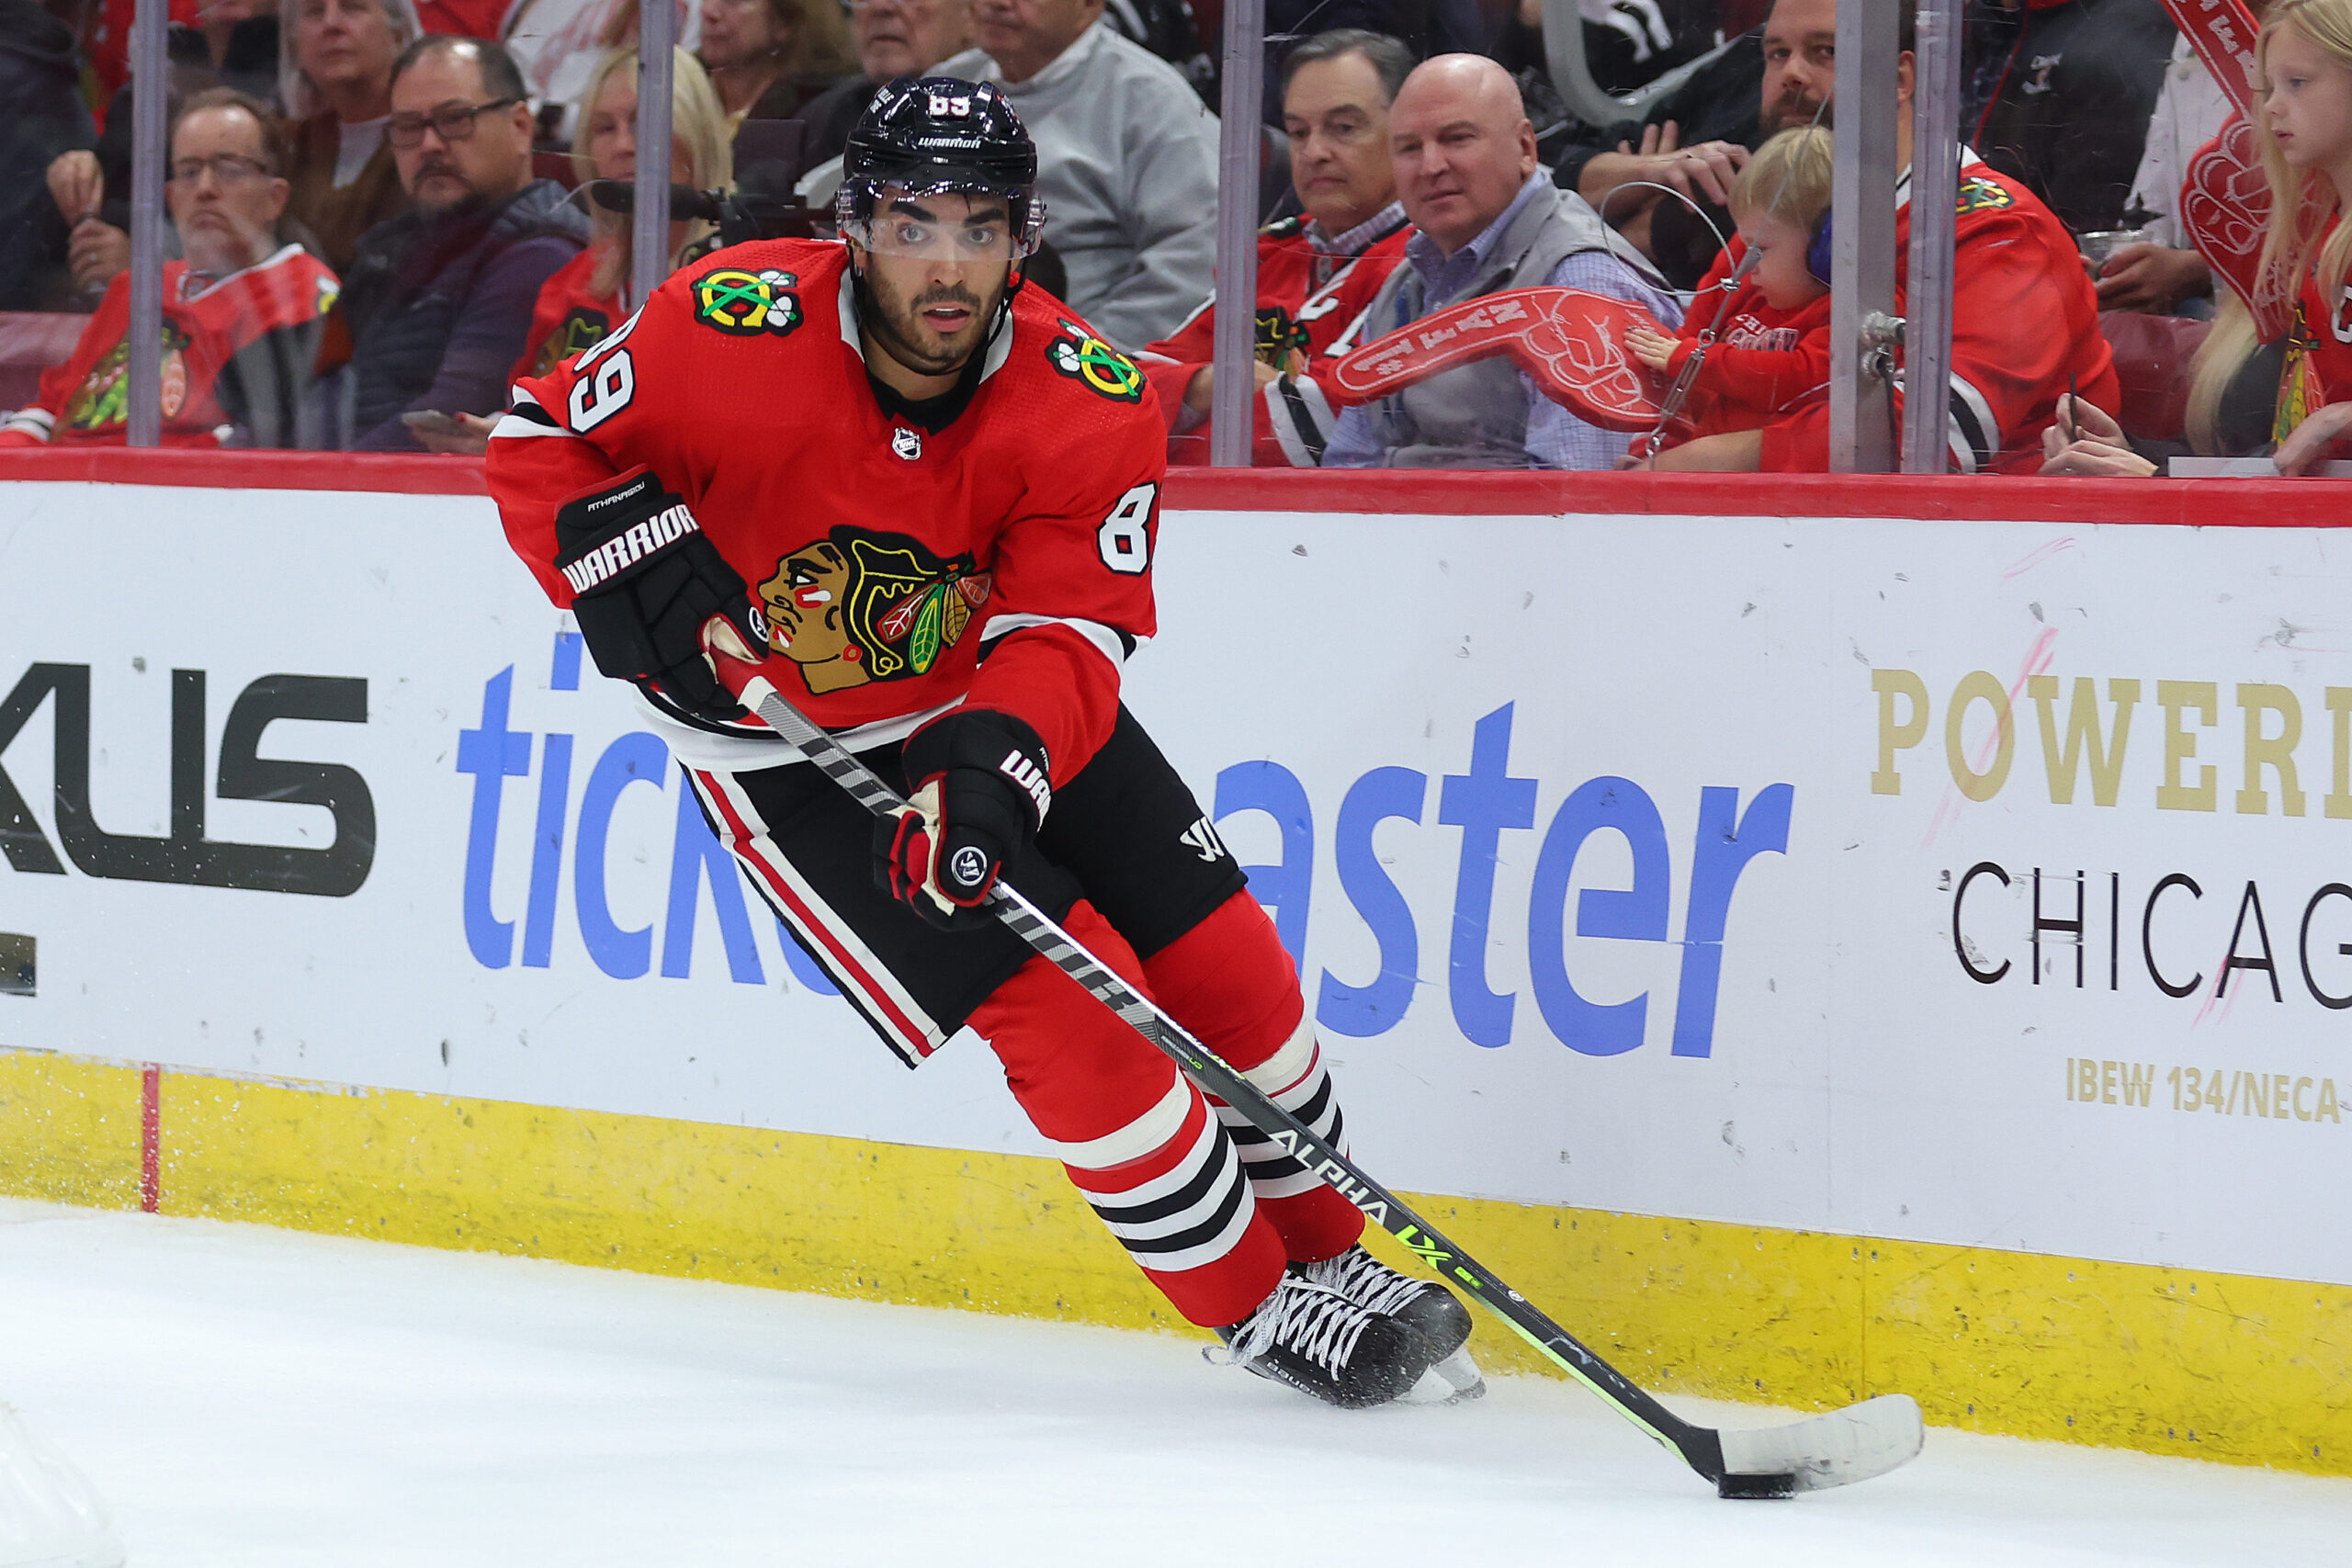 This is the perfect Chicago Blackhawks wish list for Christmas